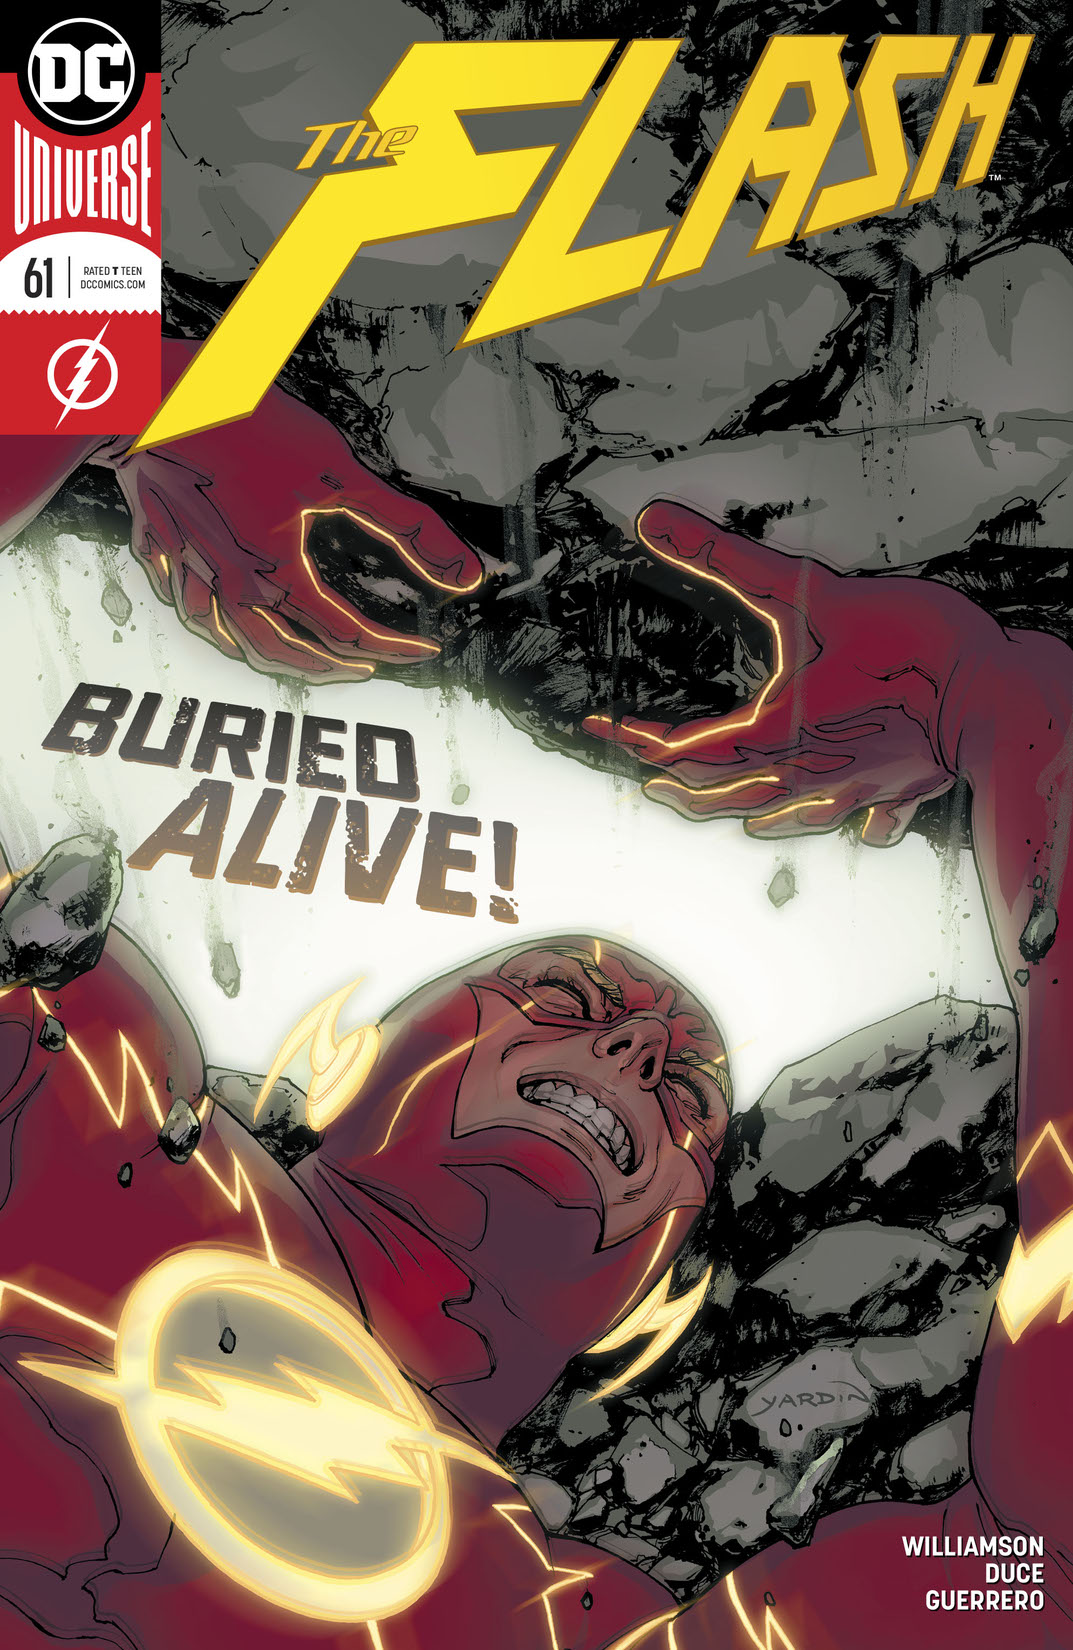 The Flash (2016-) #61 preview images